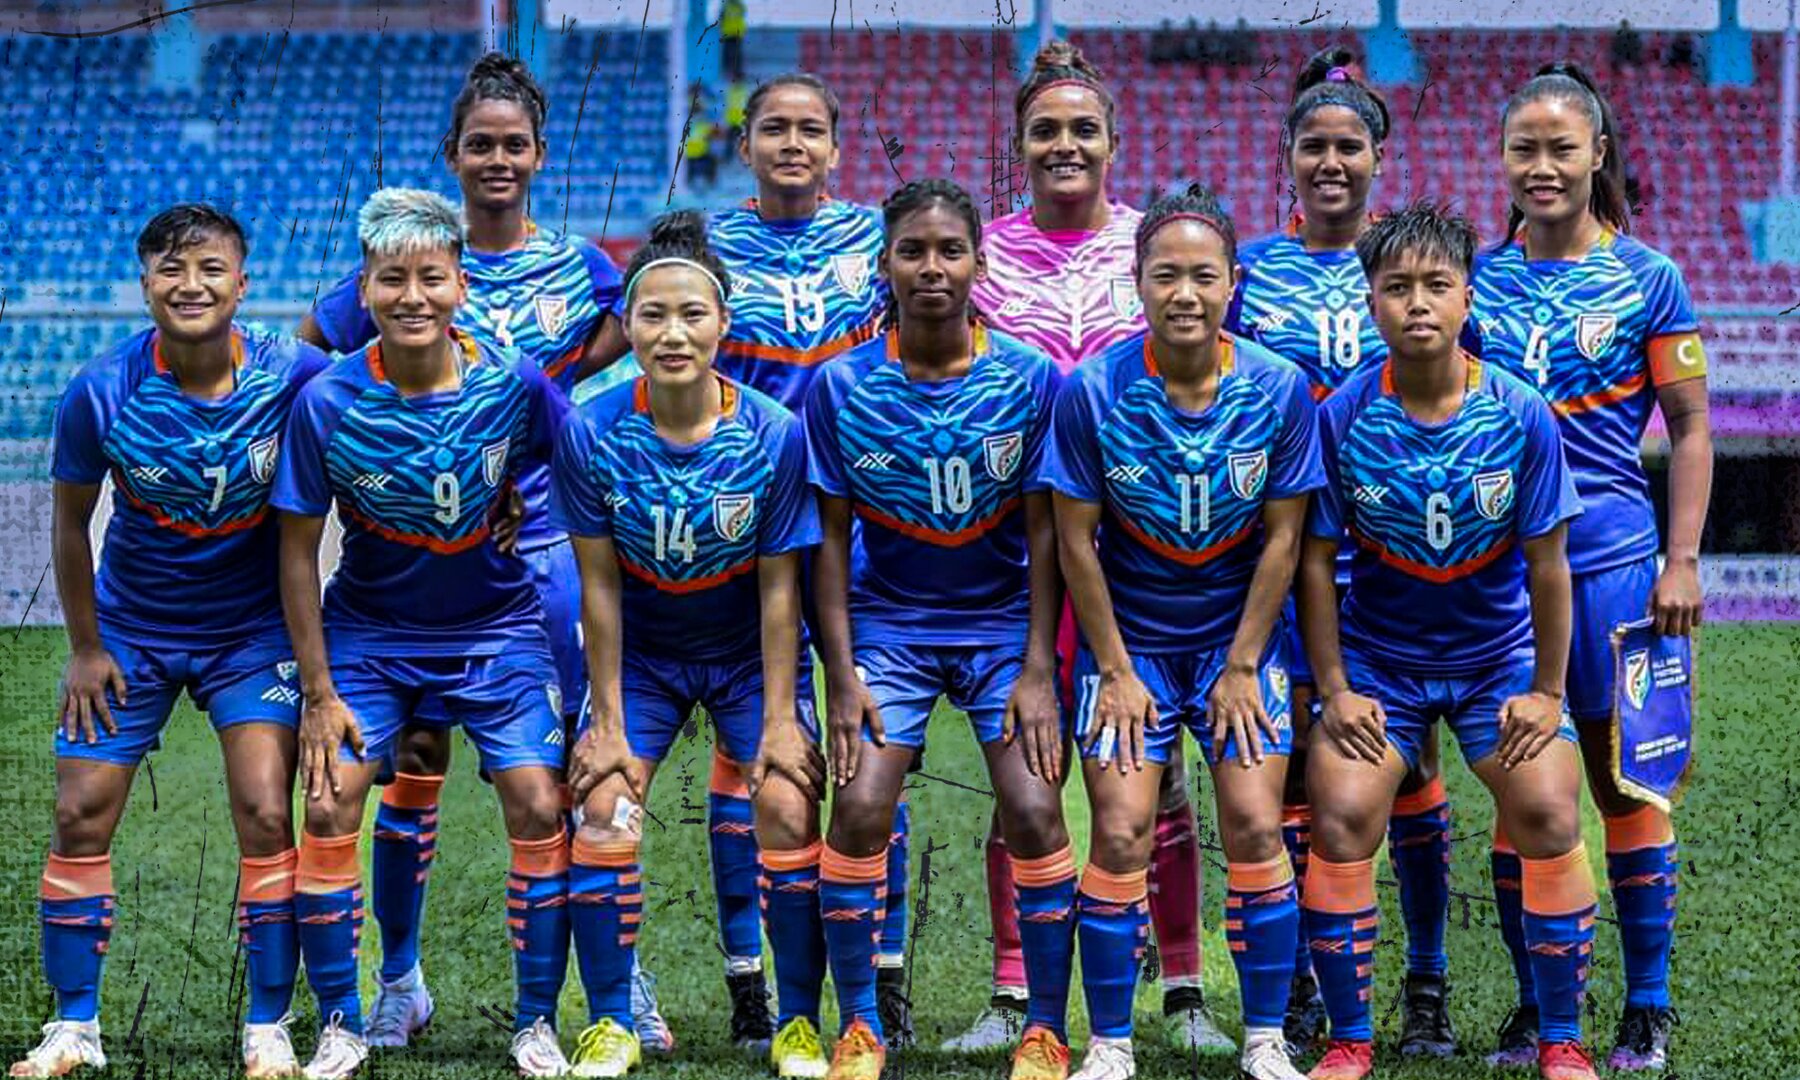 Indian Women's National Football Team records in major tournaments AFC Asian Cup